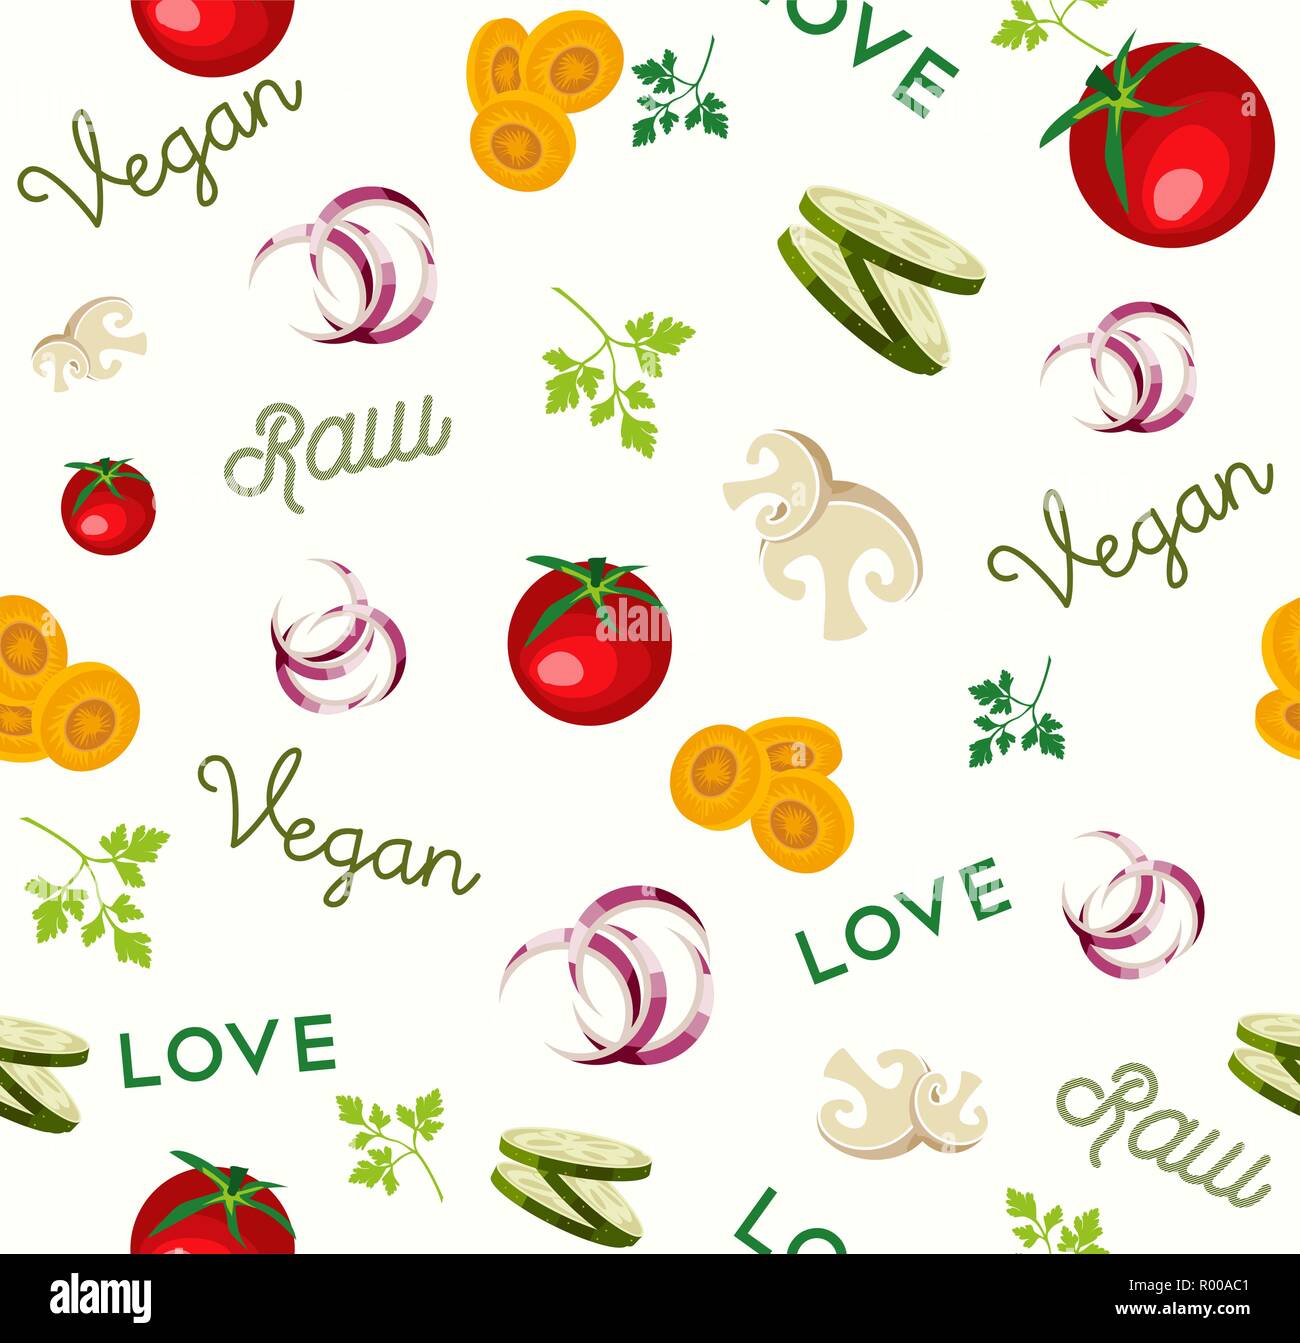 Vegan Raw food seamless pattern for nutrition and healthy diet with colorful flat vegetable icons. Stock Vector